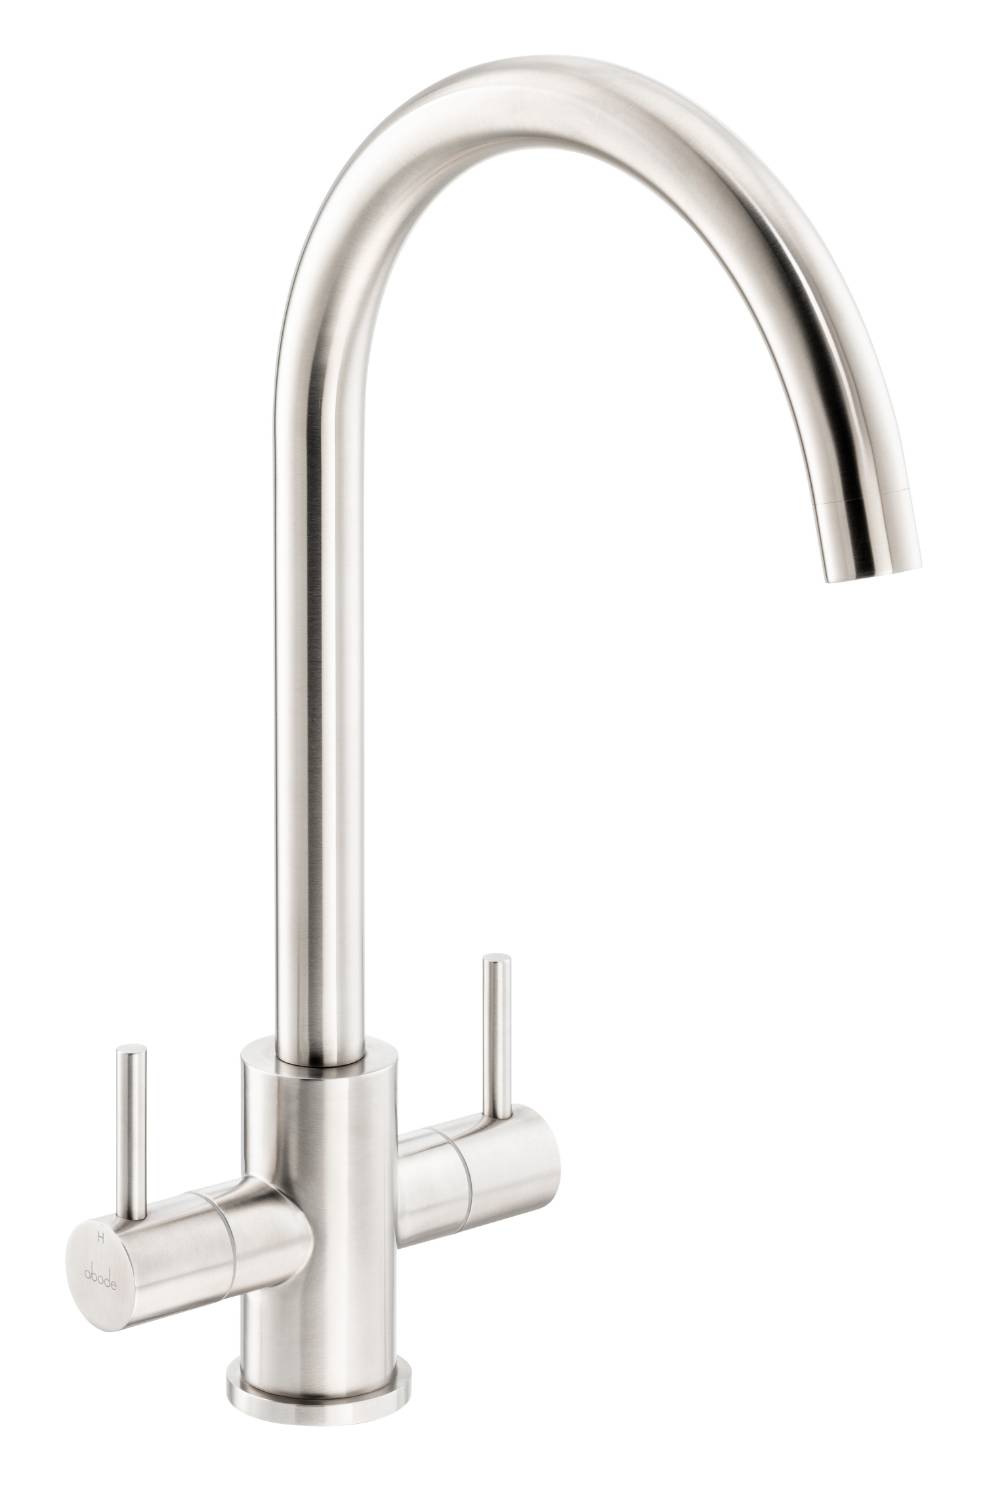 Focal Monobloc - Contemporary Stainless Steel Mixer Tap